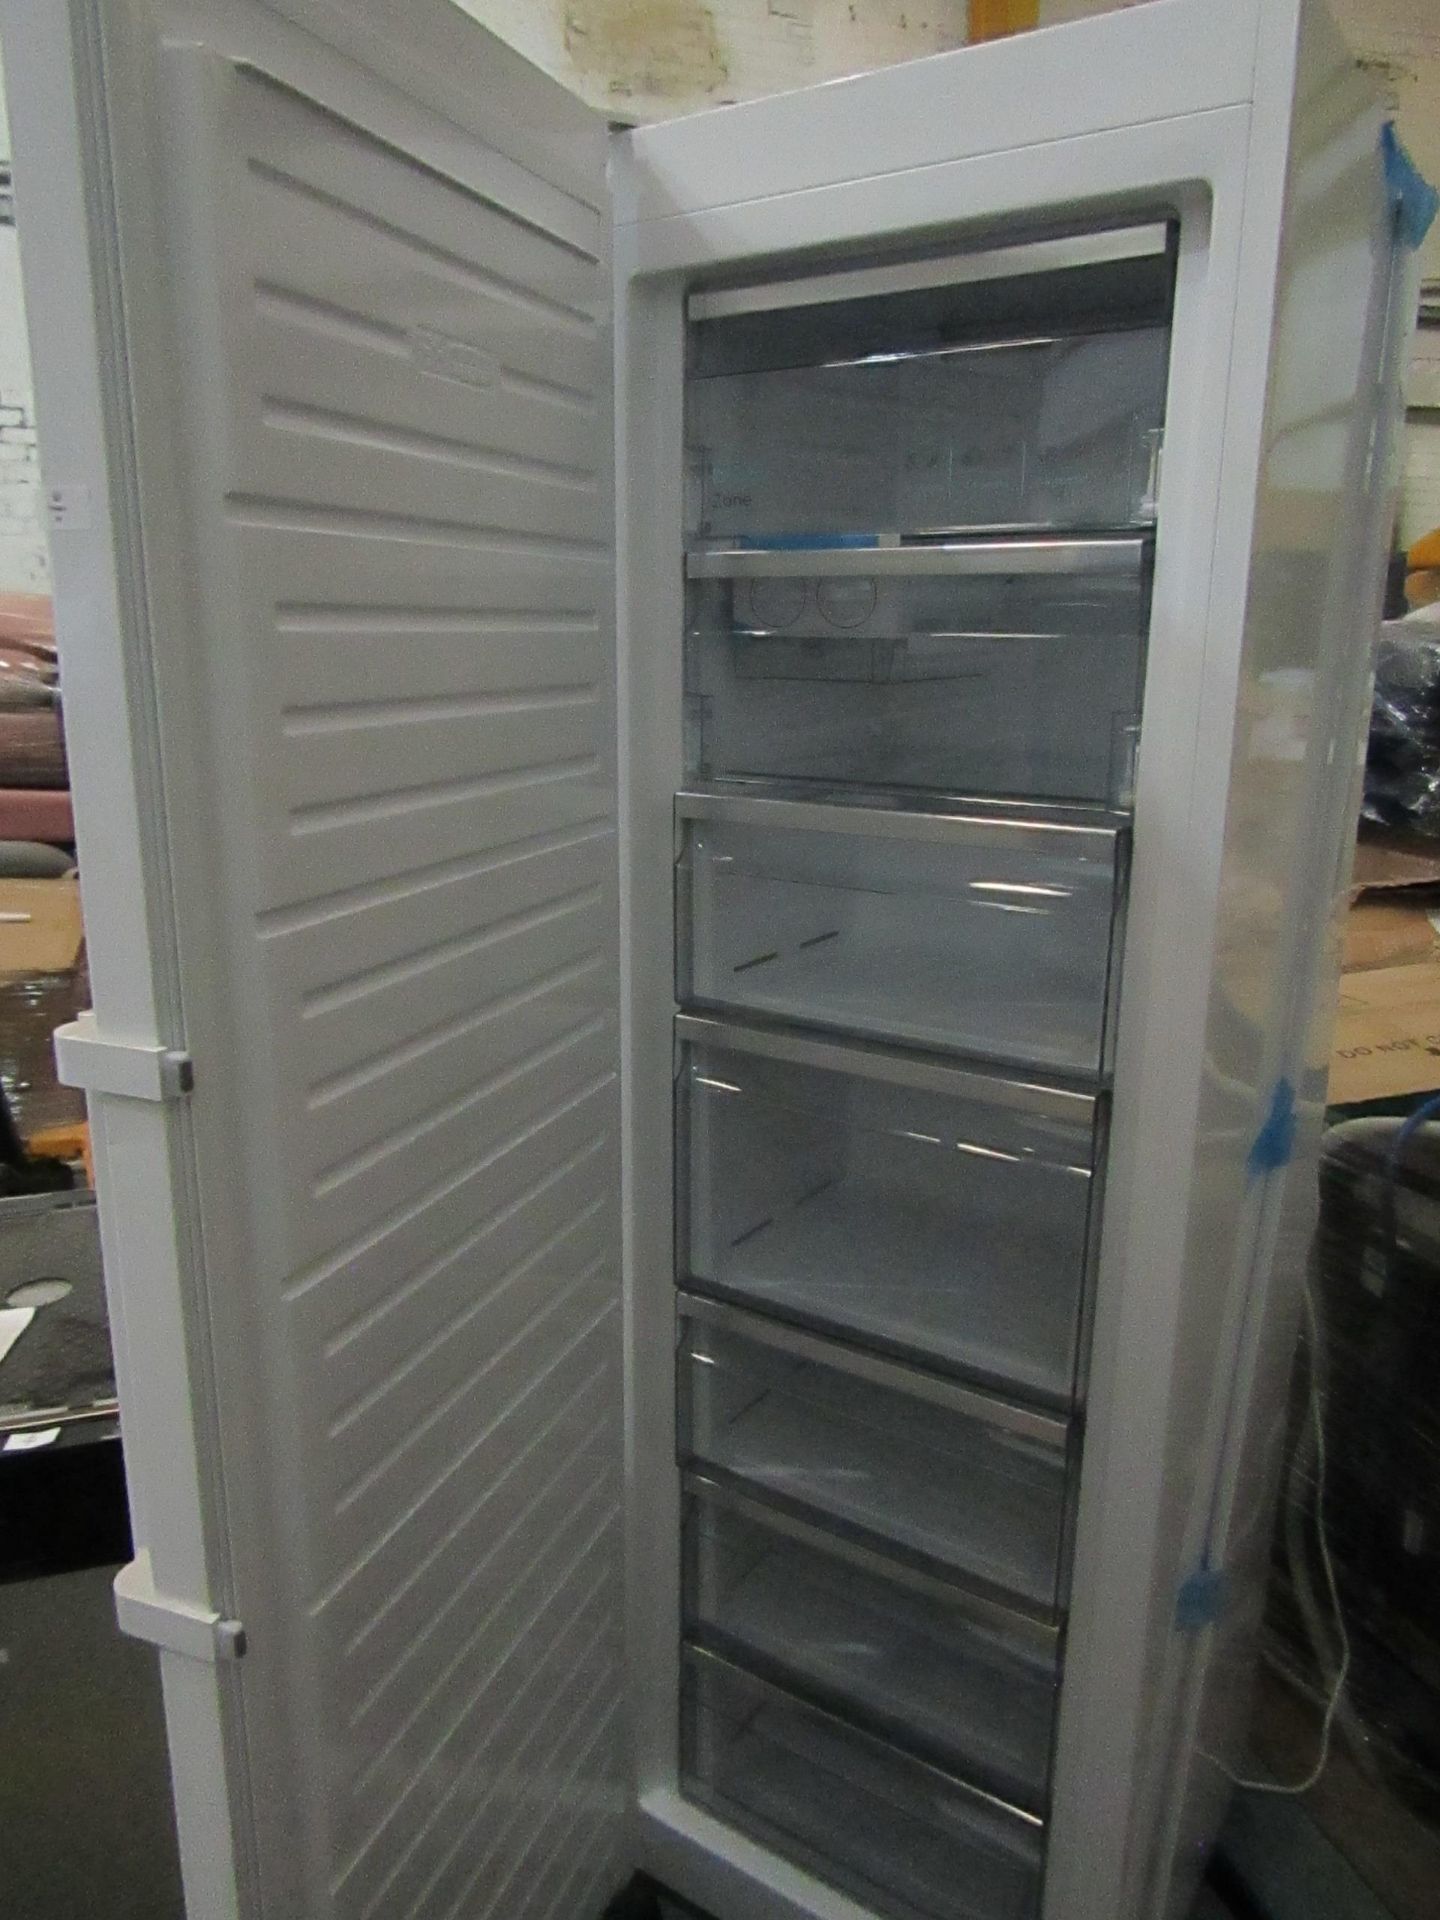 Sharp tall freestaNDing freezer, powers on but not getting cold - Image 2 of 2